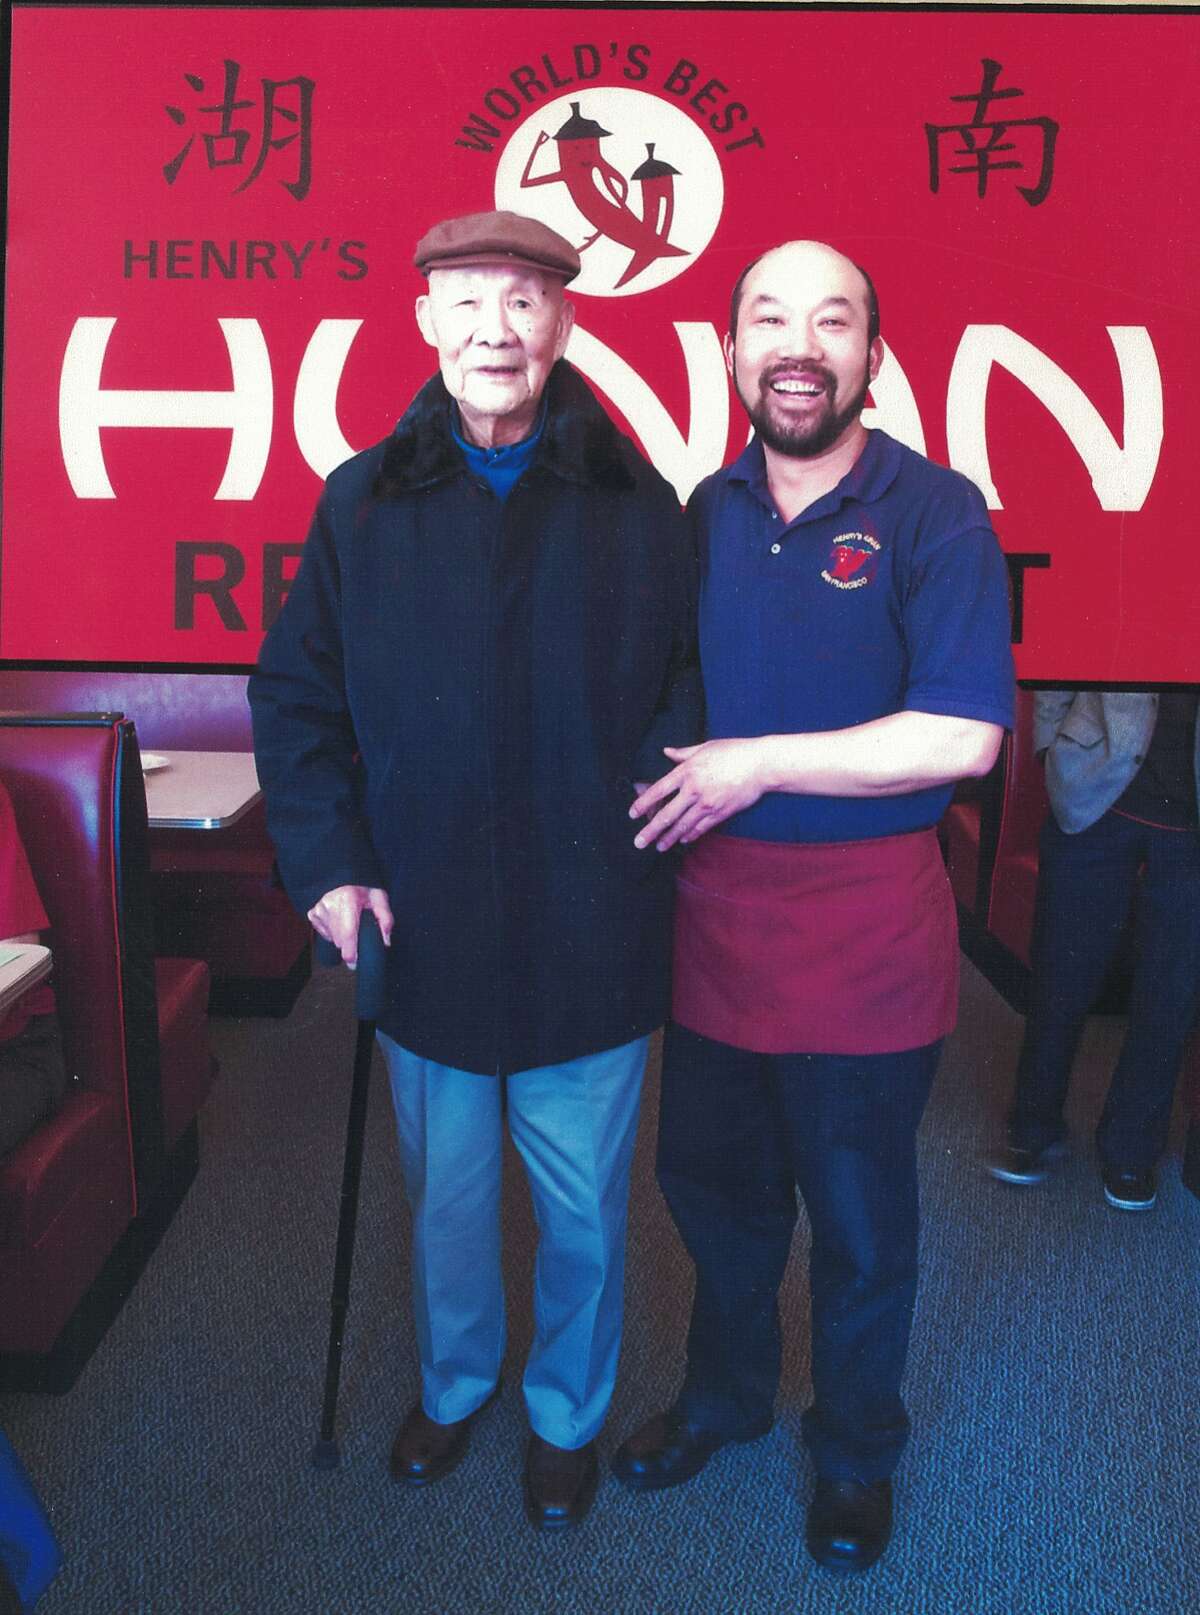 Family photos of Henry Chung, founder of Henry's Hunan.